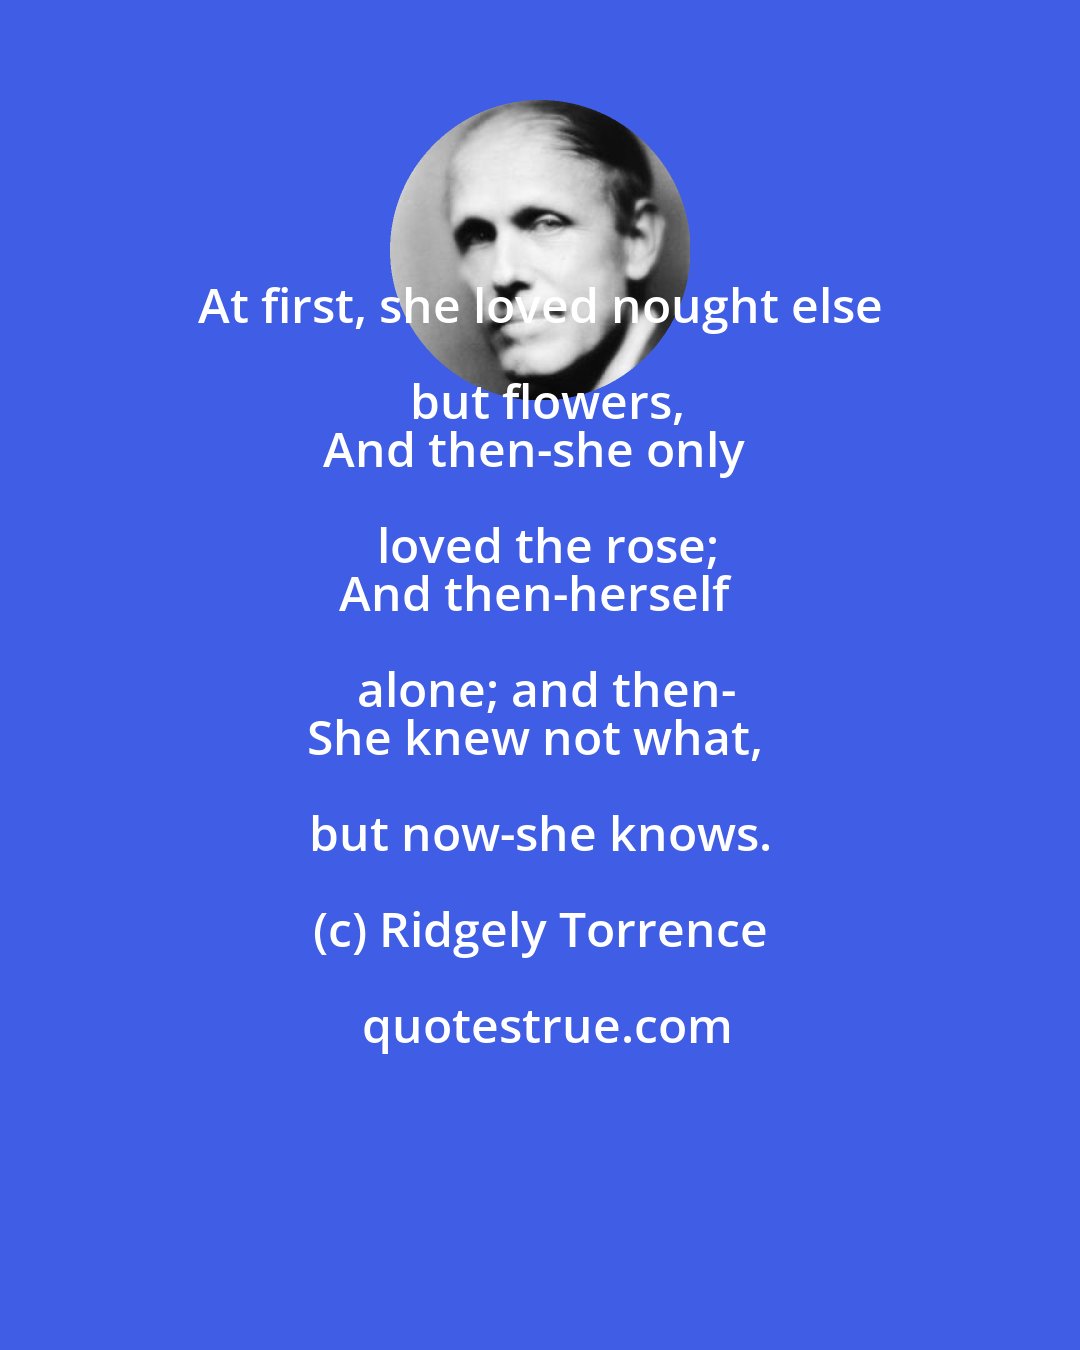 Ridgely Torrence: At first, she loved nought else but flowers,
And then-she only loved the rose;
And then-herself alone; and then-
She knew not what, but now-she knows.